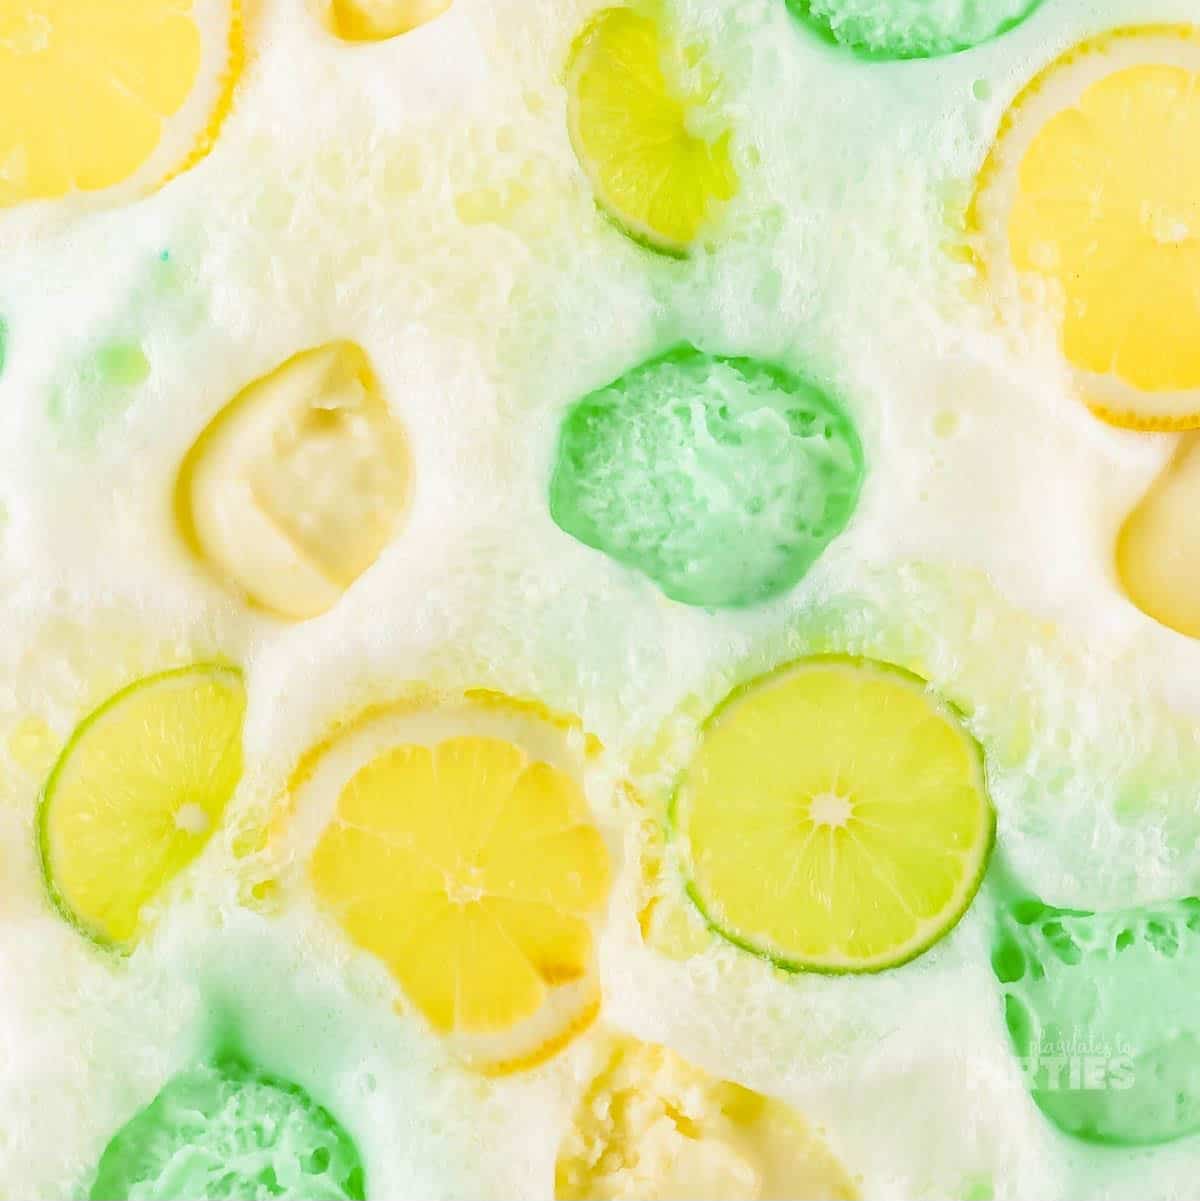 Scoops of yellow and green sherbet with lemon and lime slices floating in a punch bowl.